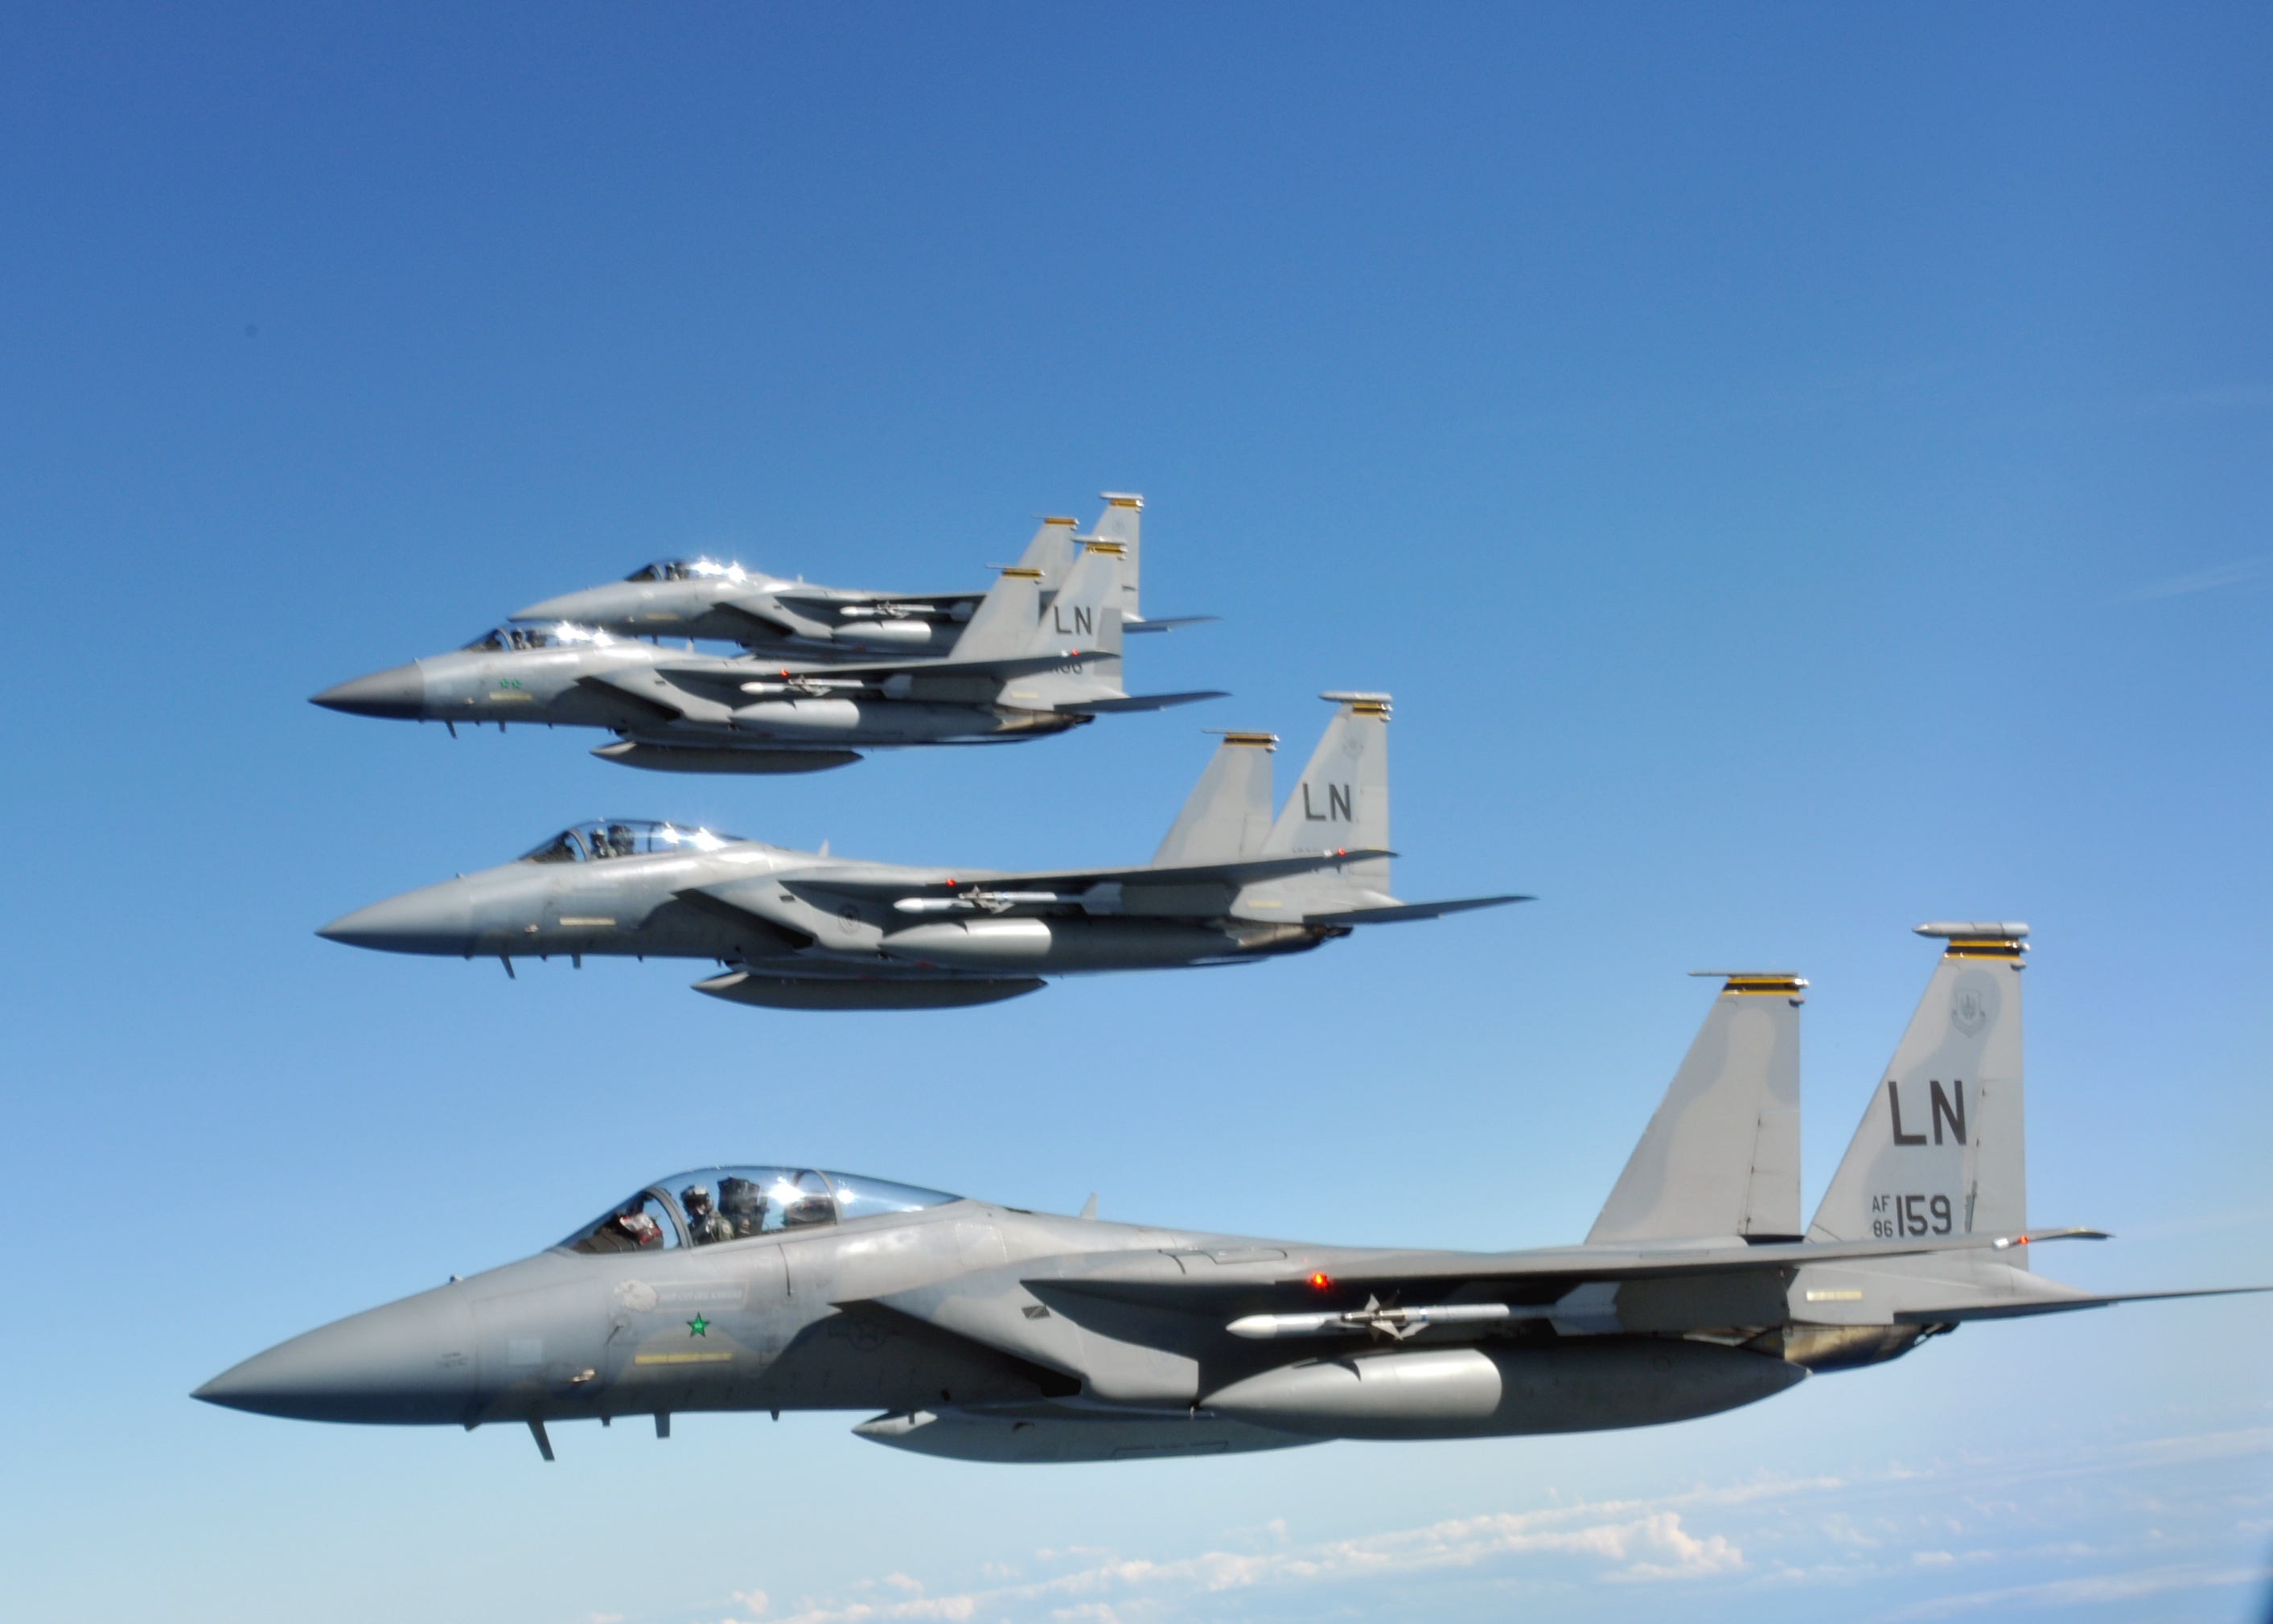 Four U.S. Air Force F-15C Eagles on their way to Arctic Challenge exercise